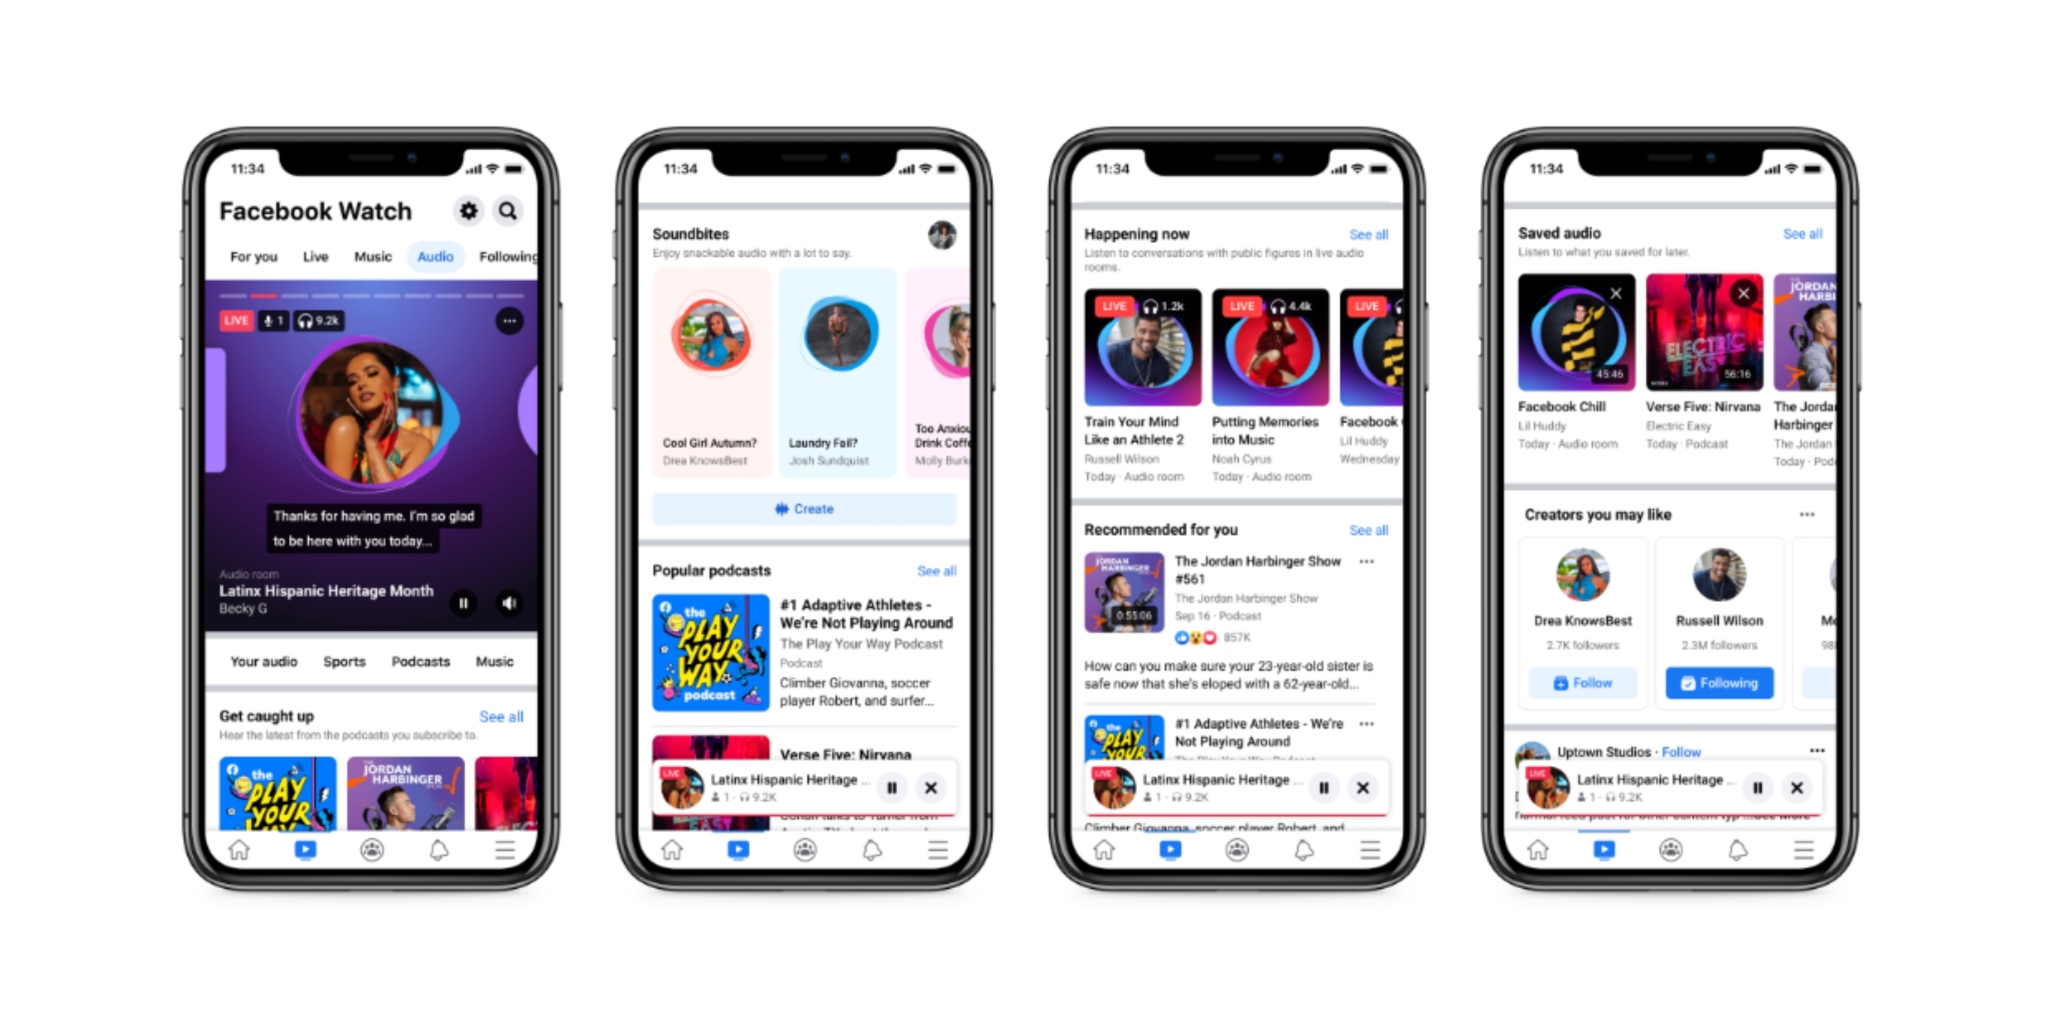 Facebook adds a new Audio feature for podcasts, live audio, more